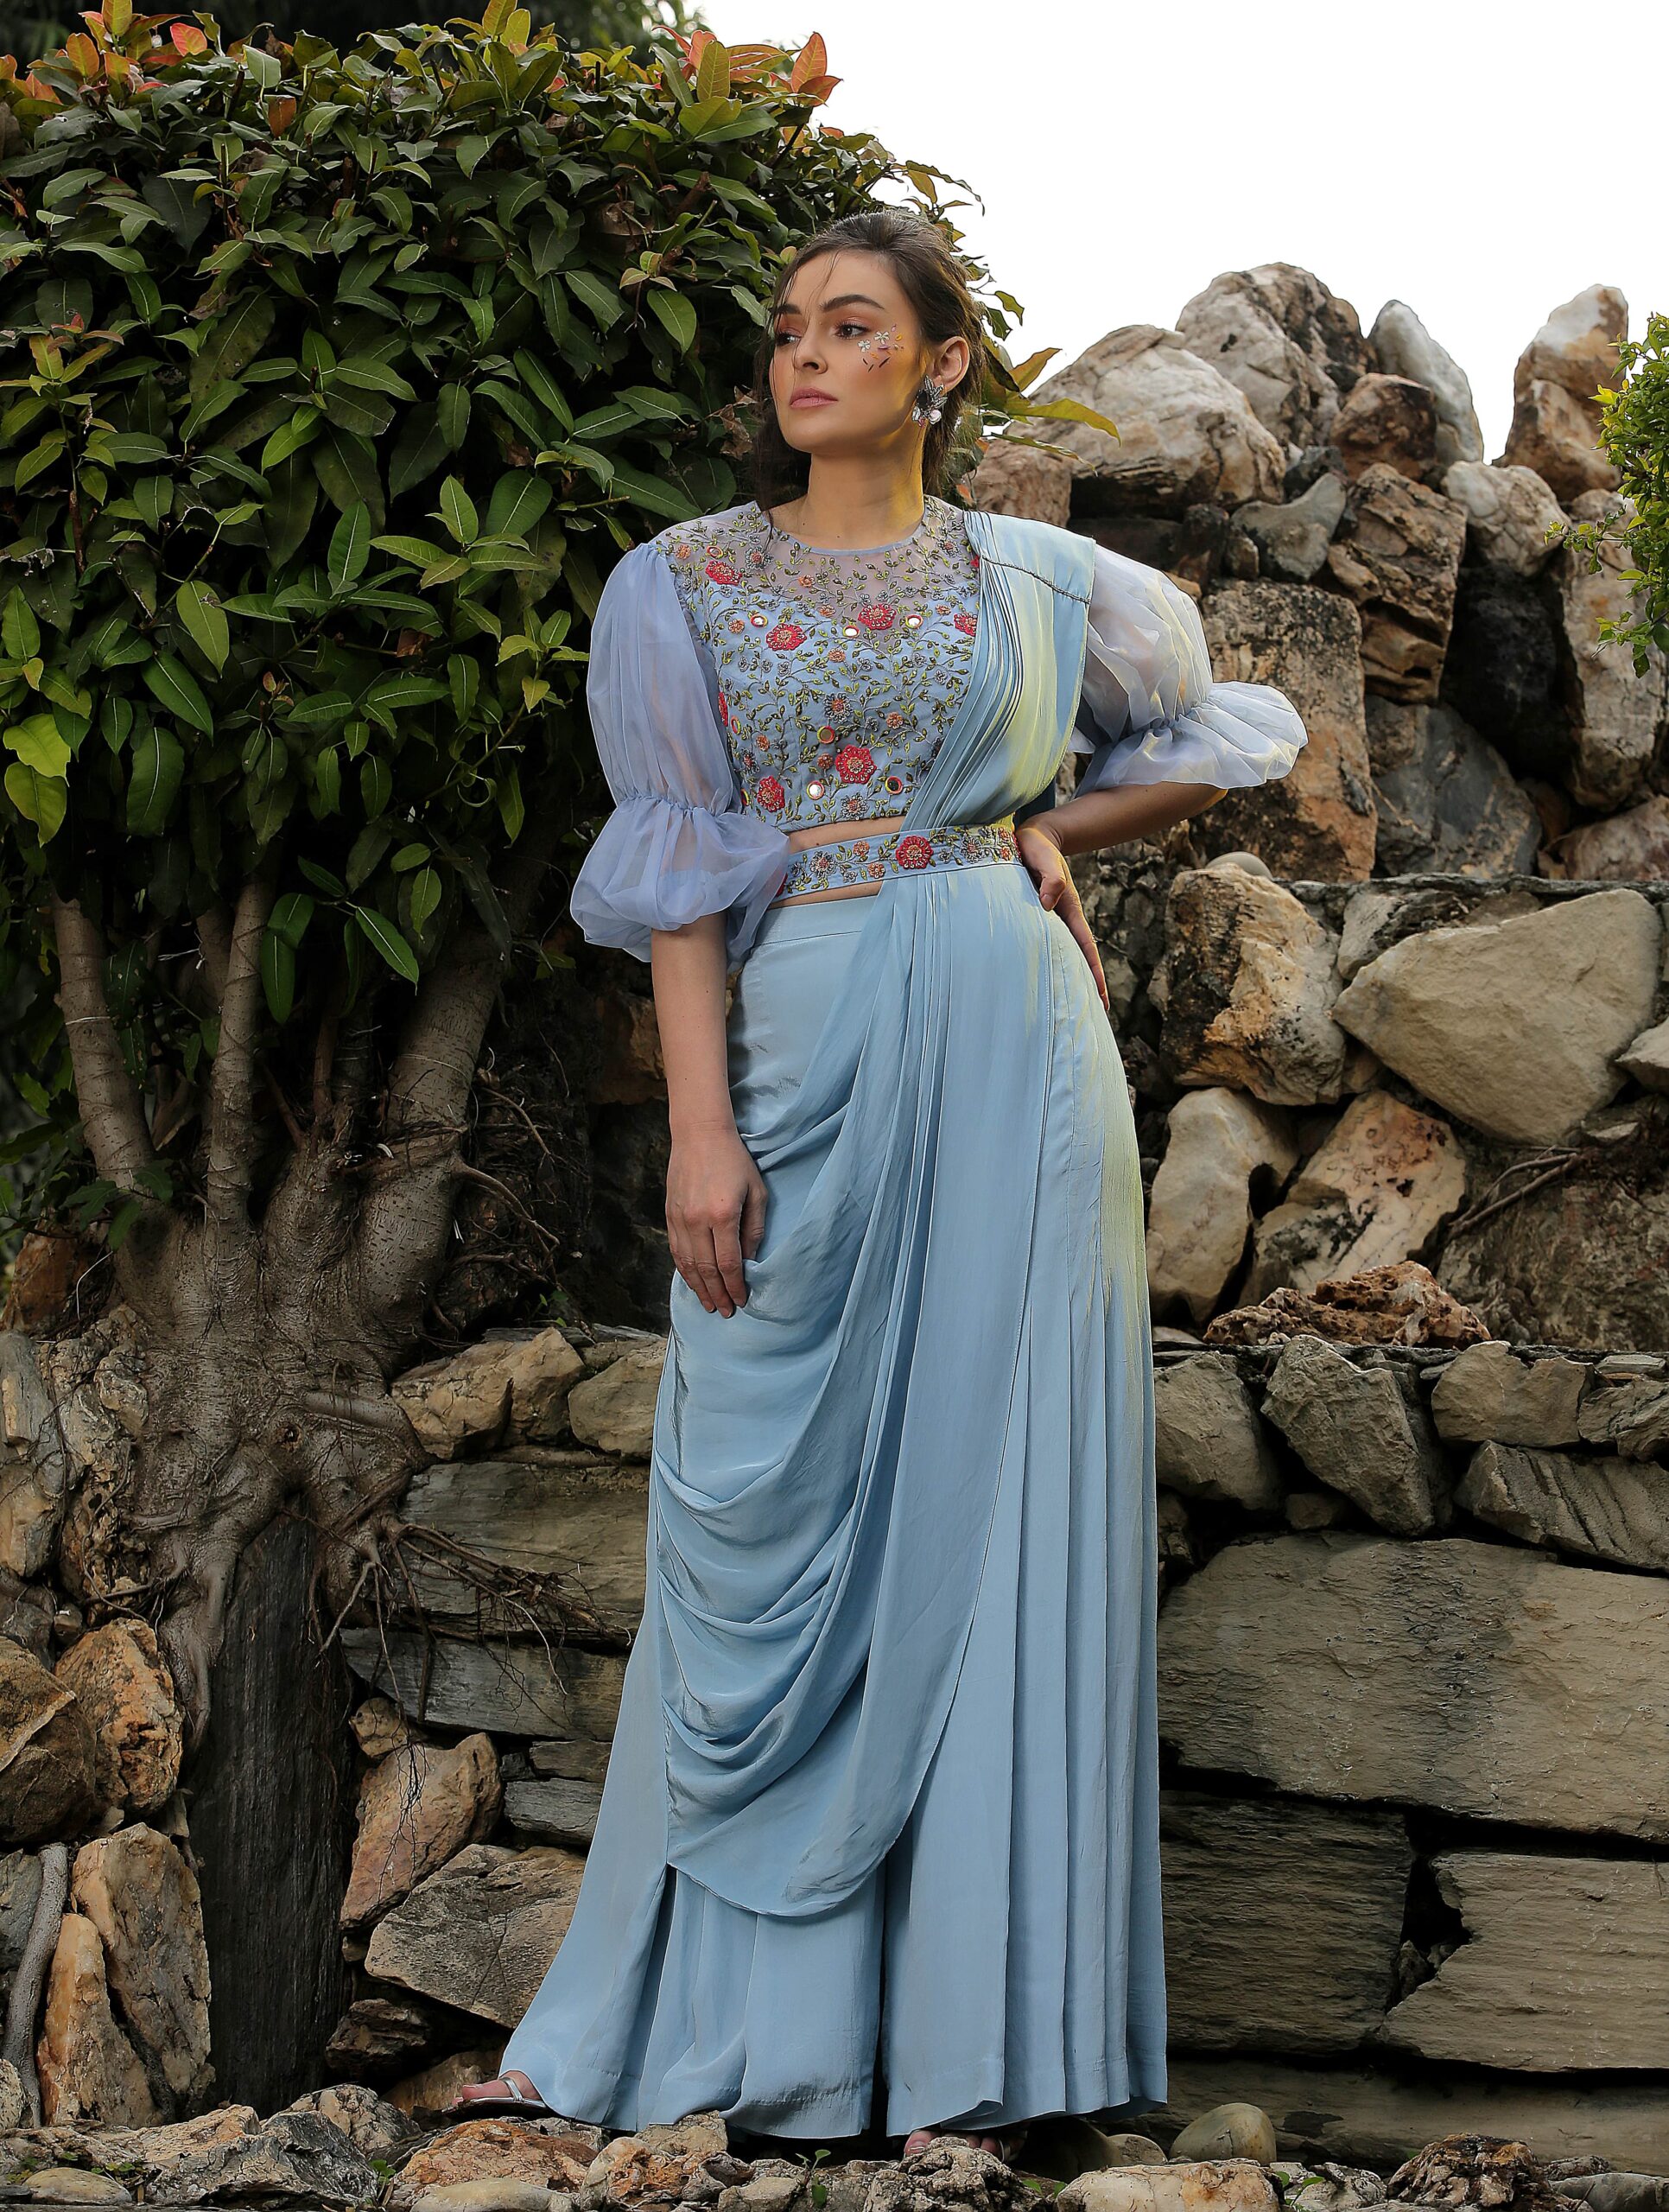 Refreshing ensembles designed with sophisticated intricate details and soothing hues.